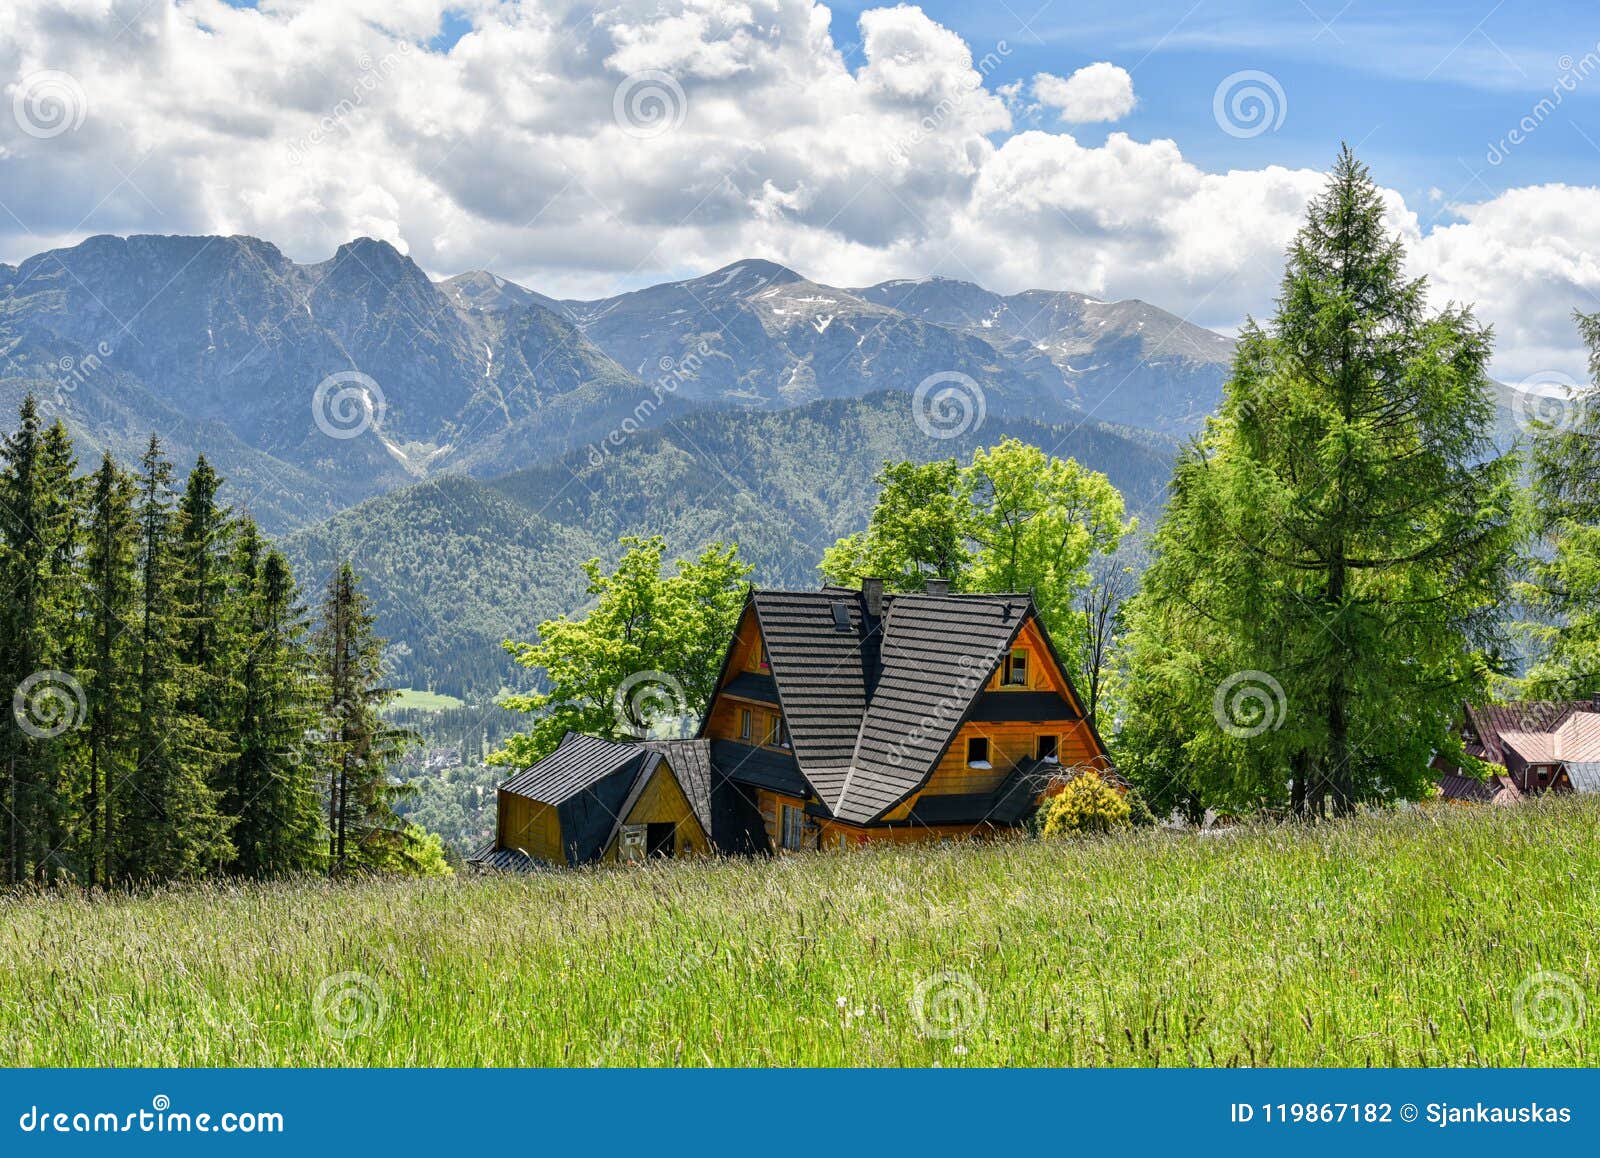 rural landscape, country house in the foothills of tatra mountains, zakopane